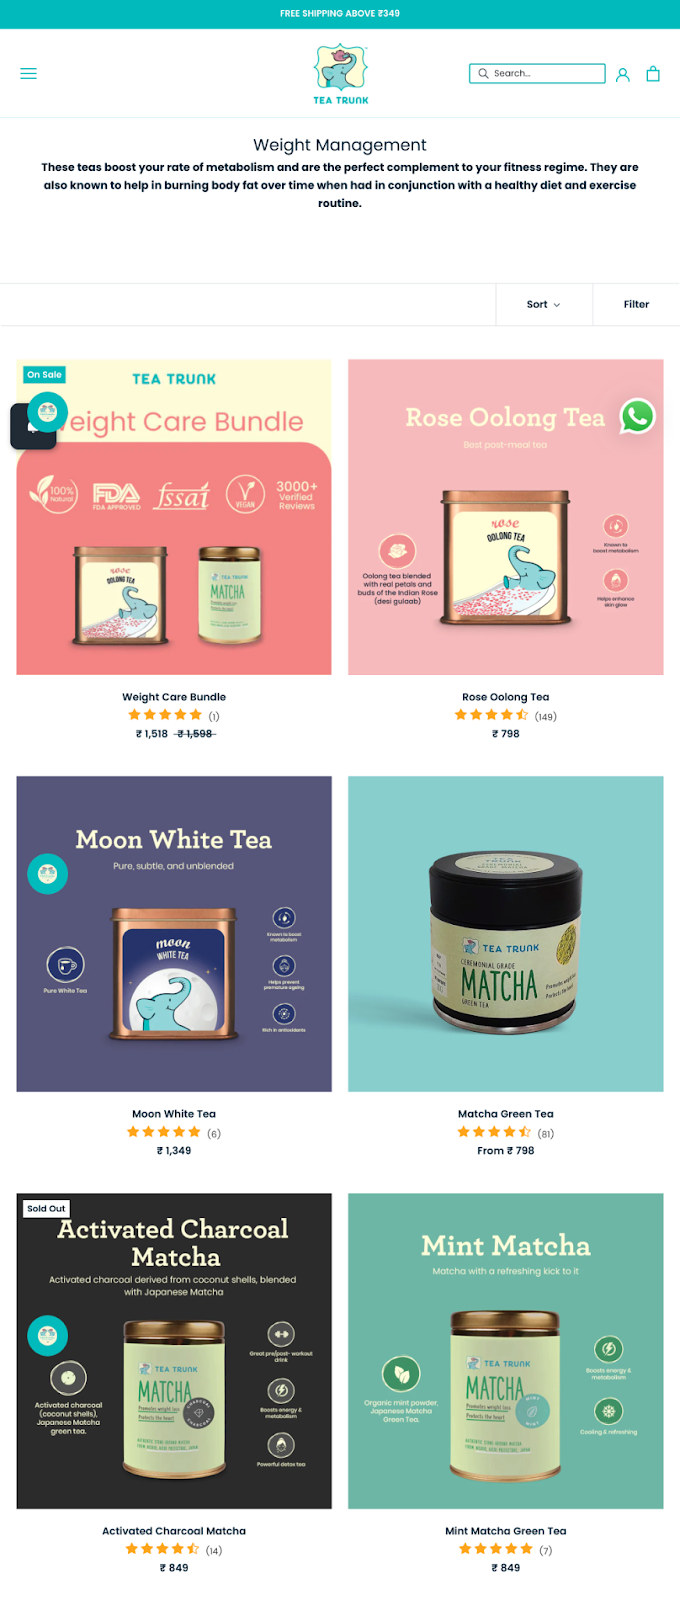 Mental Wellness Brands for World Mental Health Day–A screenshot from Tea Trunk’s website of their ‘Weight Management’ teas. The page description is, “These teas boost your rate of metabolism and are the perfect complement to your fitness regime. They are also known to help in burning body fat over time when had in conjunction with a healthy diet and exercise routine.”